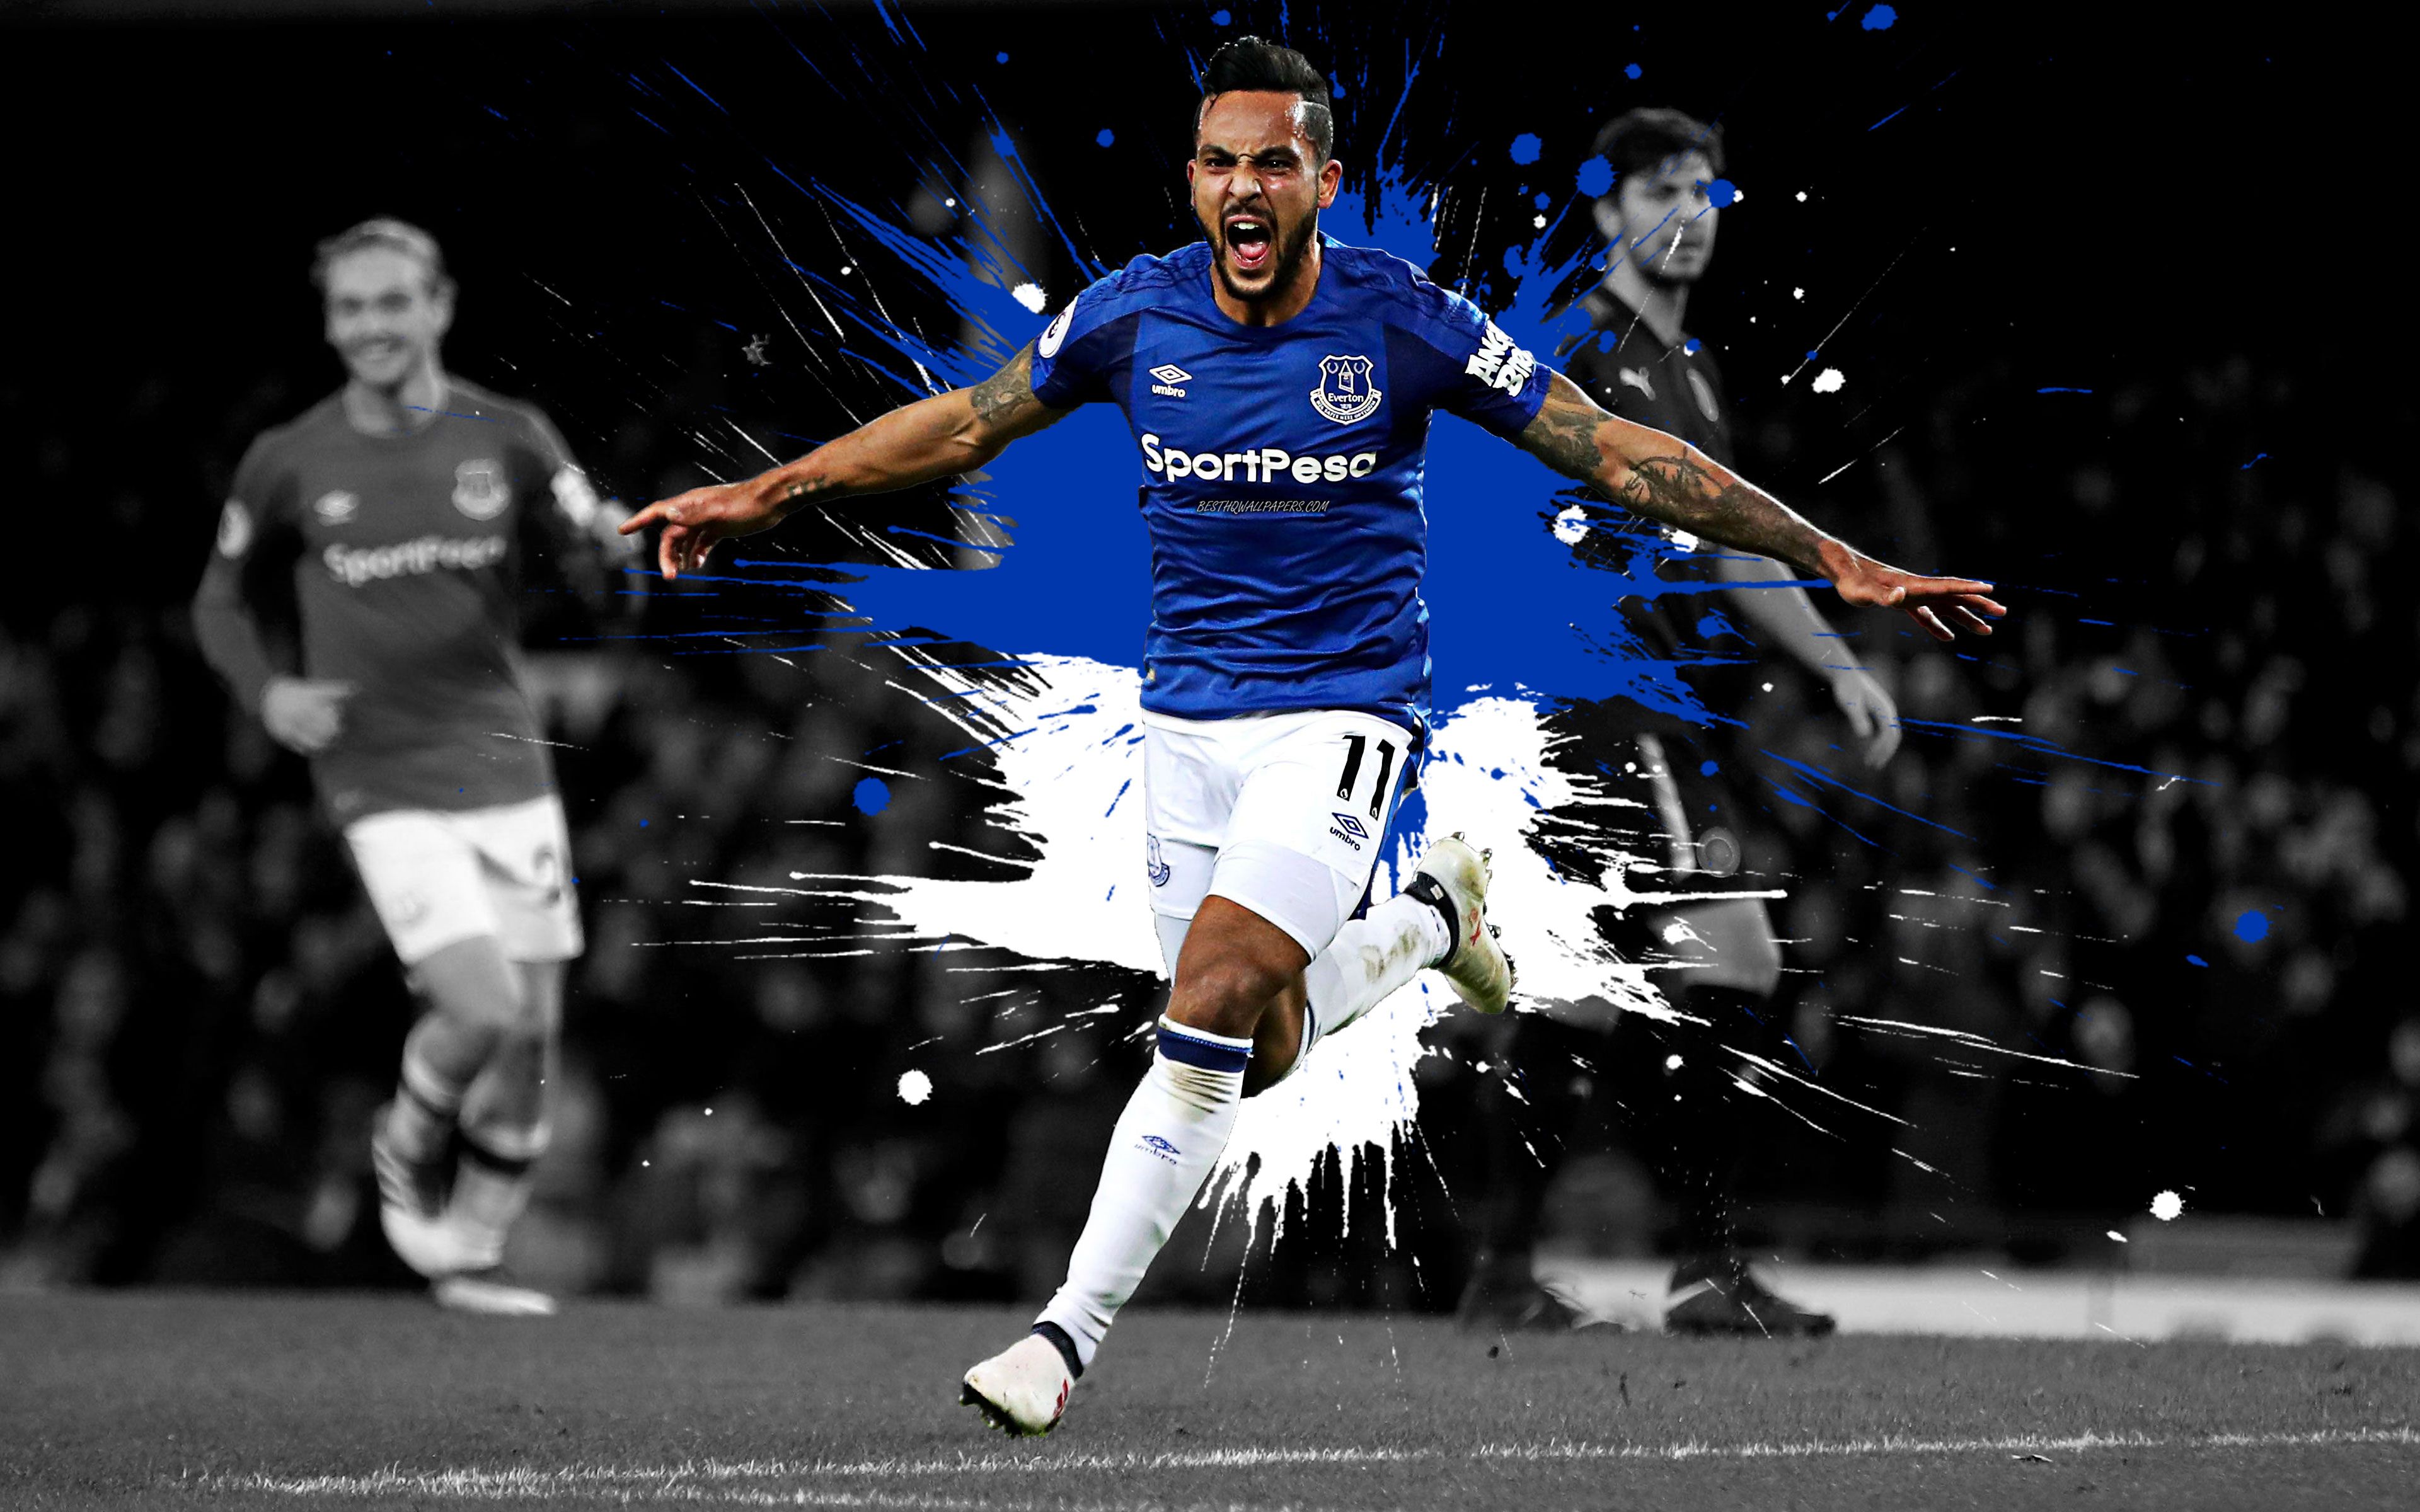 Download wallpaper Theo Walcott, 4k, art, Everton FC, English football player, splashes of paint, grunge art, creative art, Premier League, England, football for desktop with resolution 3840x2400. High Quality HD picture wallpaper